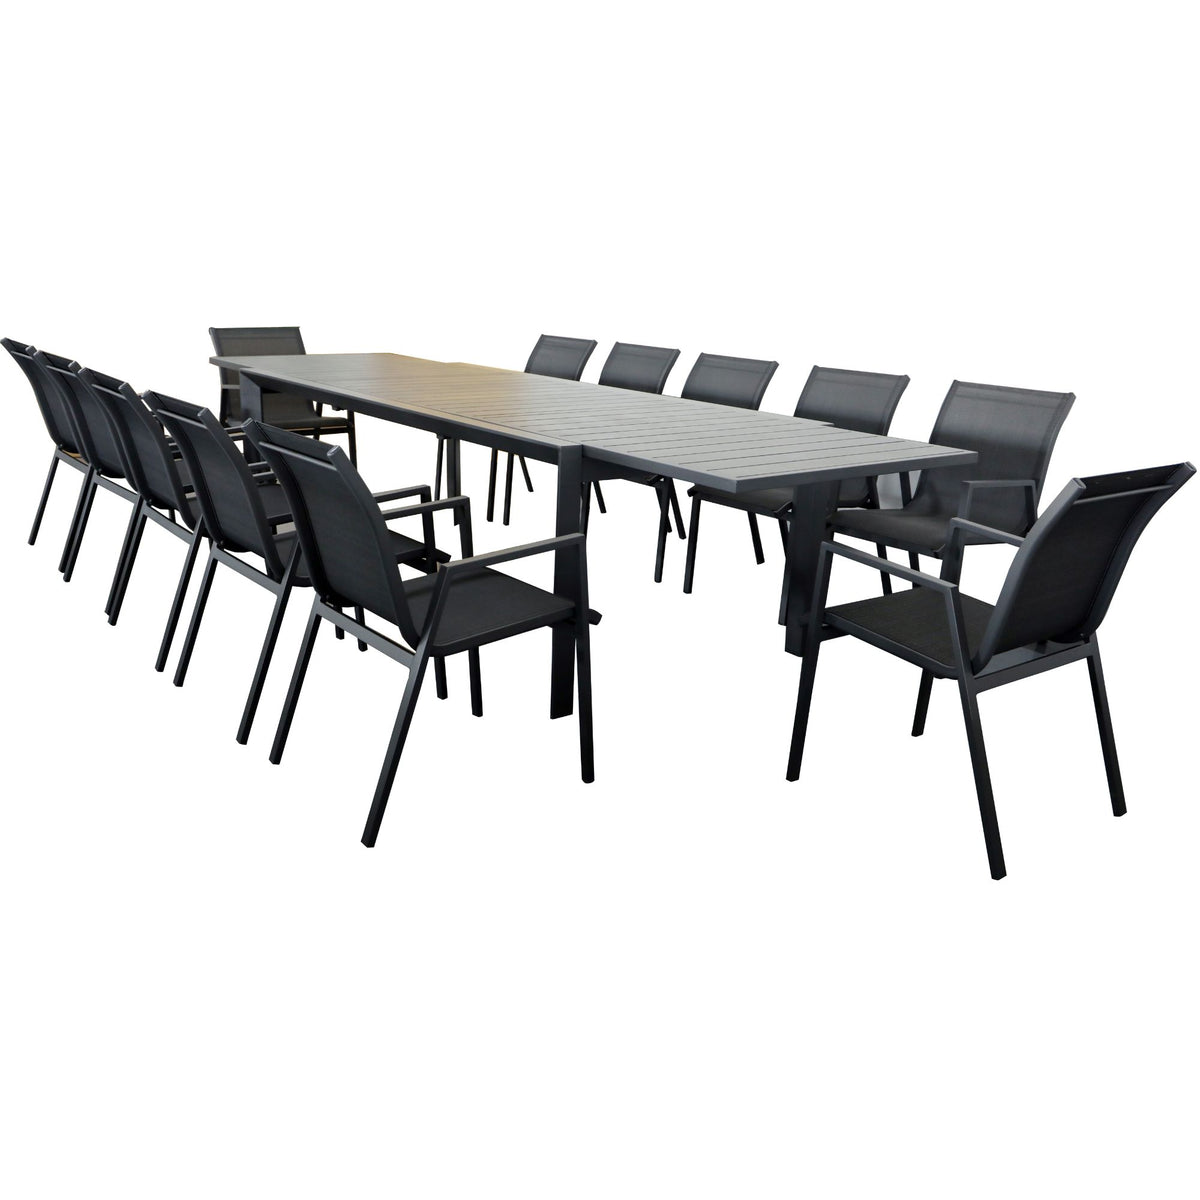 Iberia 13pc Outdoor Extensible Dining Table Chair Set Charcoal 